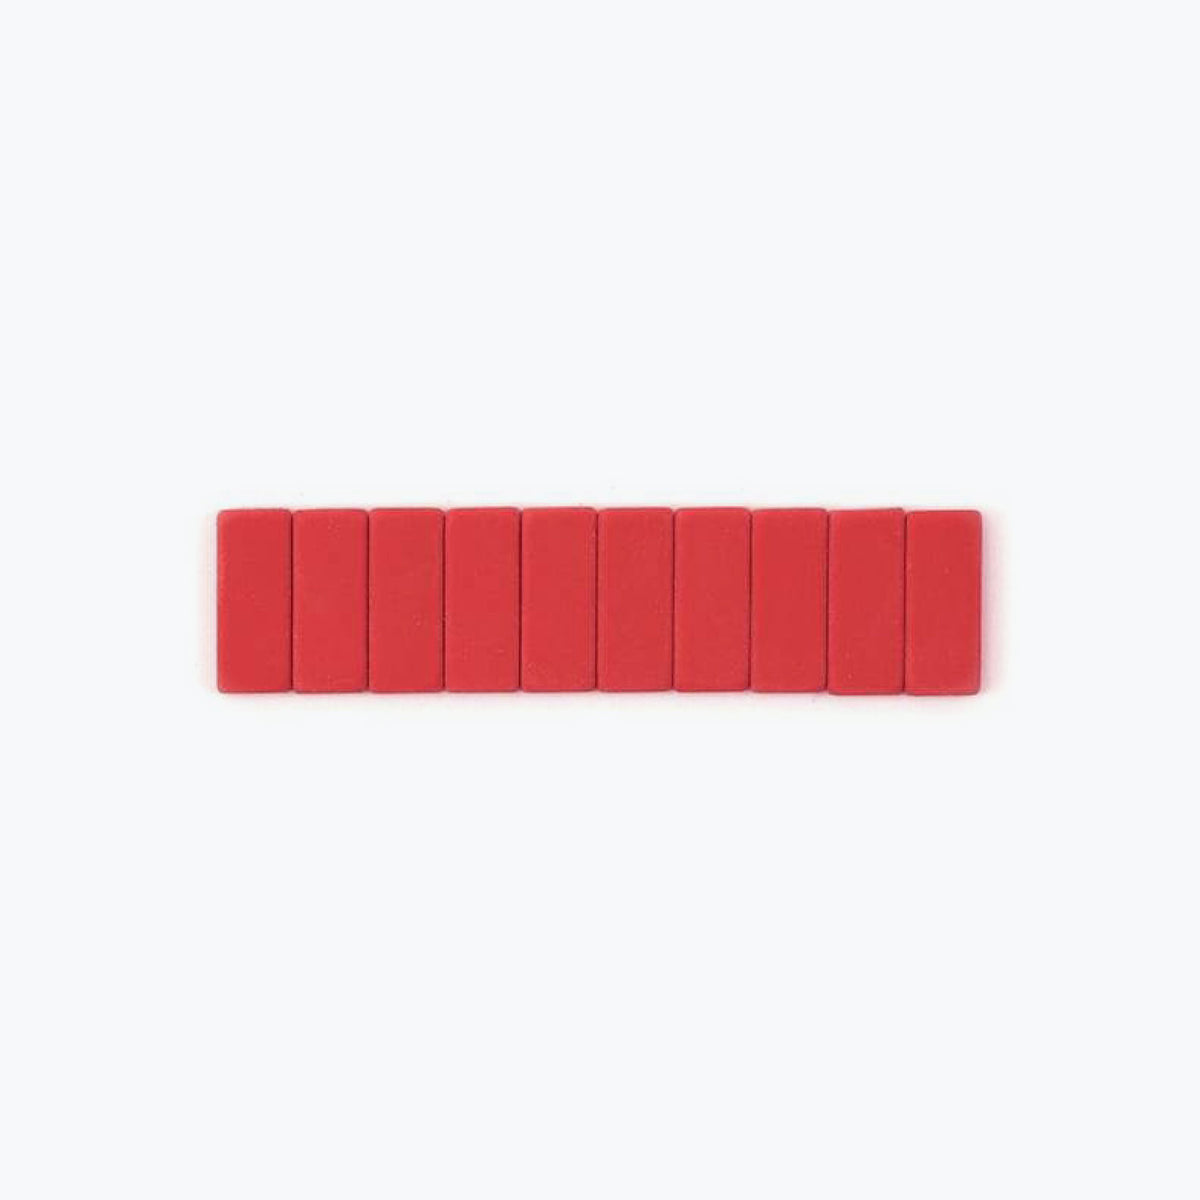 Palomino Blackwing - Replacement Erasers - 10 Pack - Red